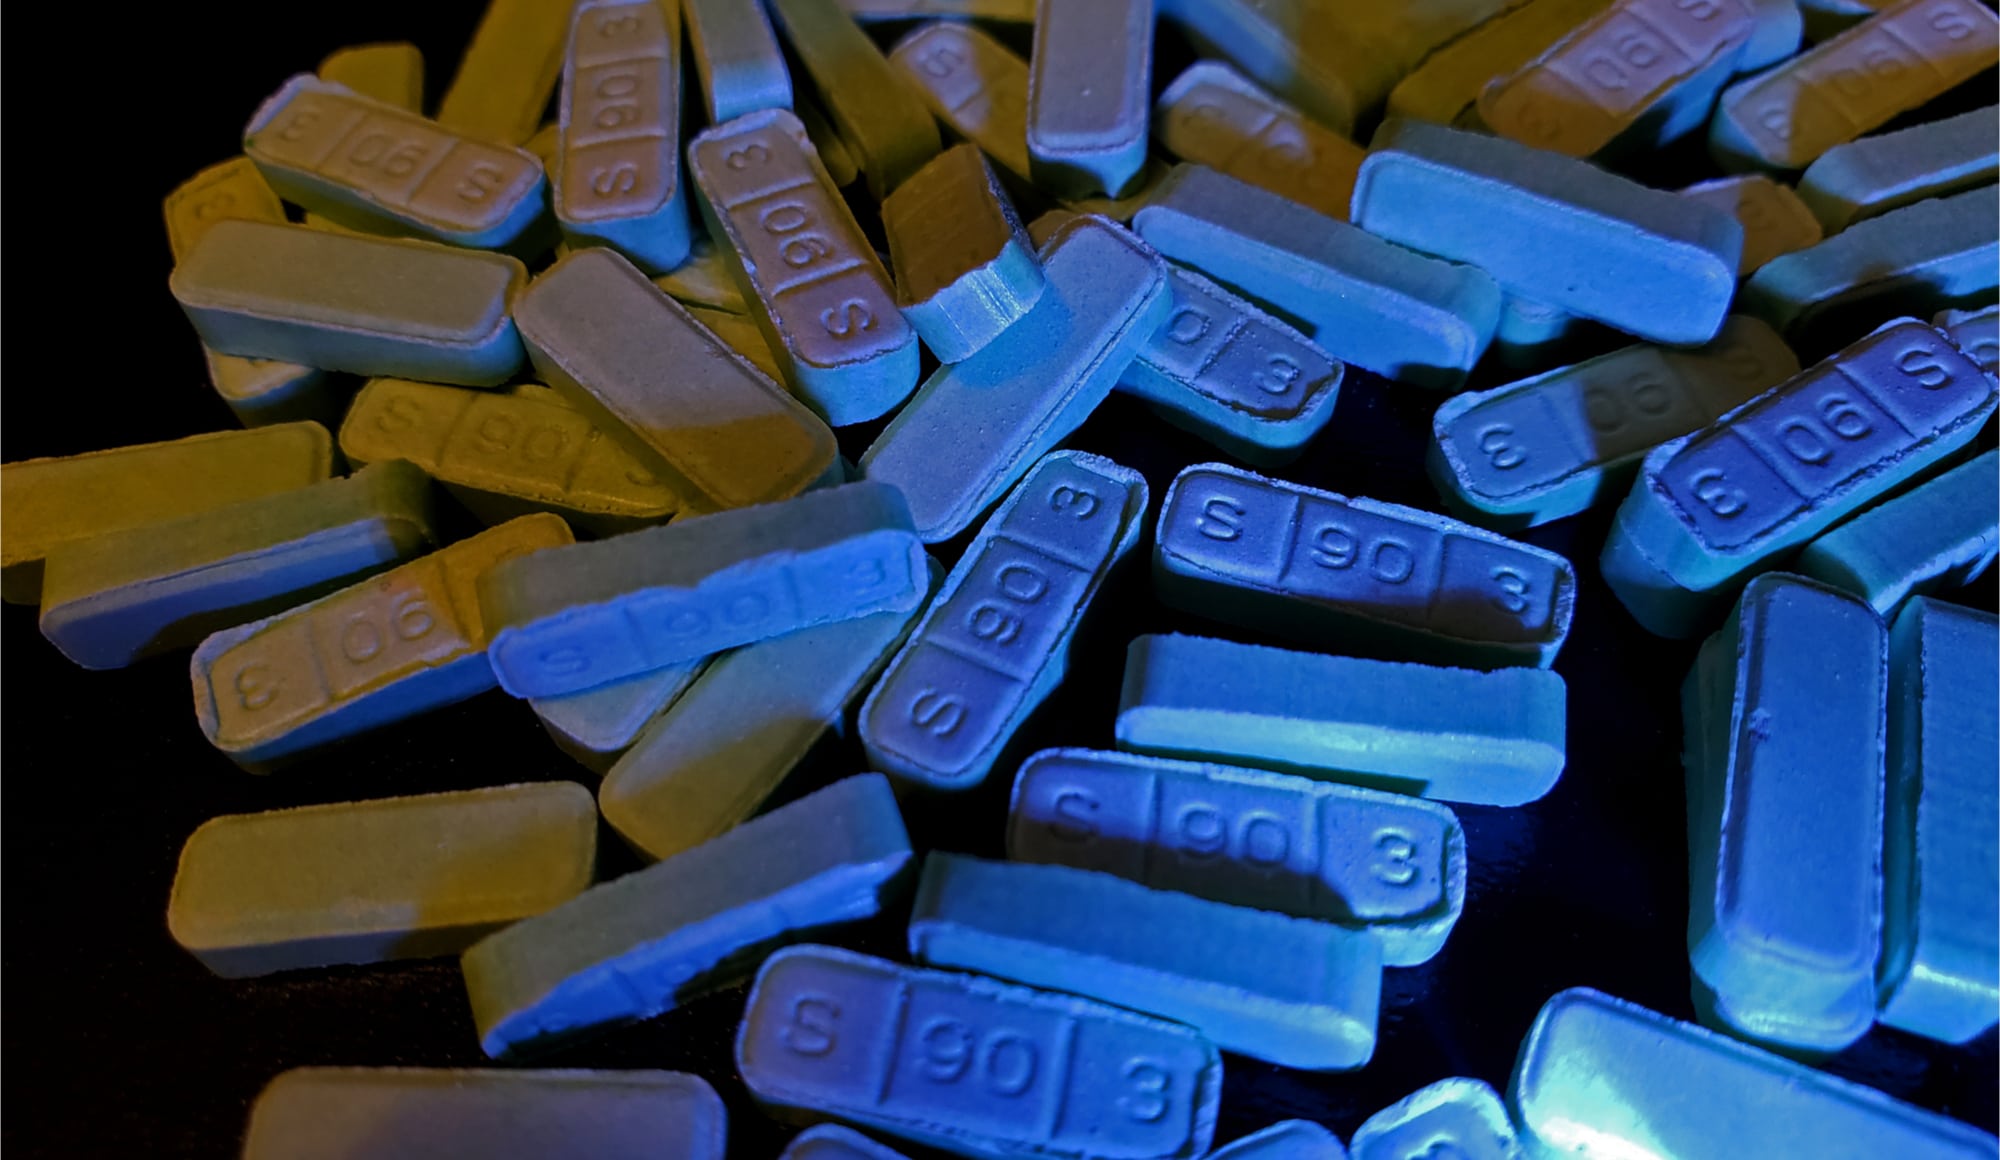 Xanax Abuse is On the Rise Pathfinders - As one of the most widely prescribed drugs Xanax abuse is on the rise. It is easy to fall into addiction and need drug rehab for help.